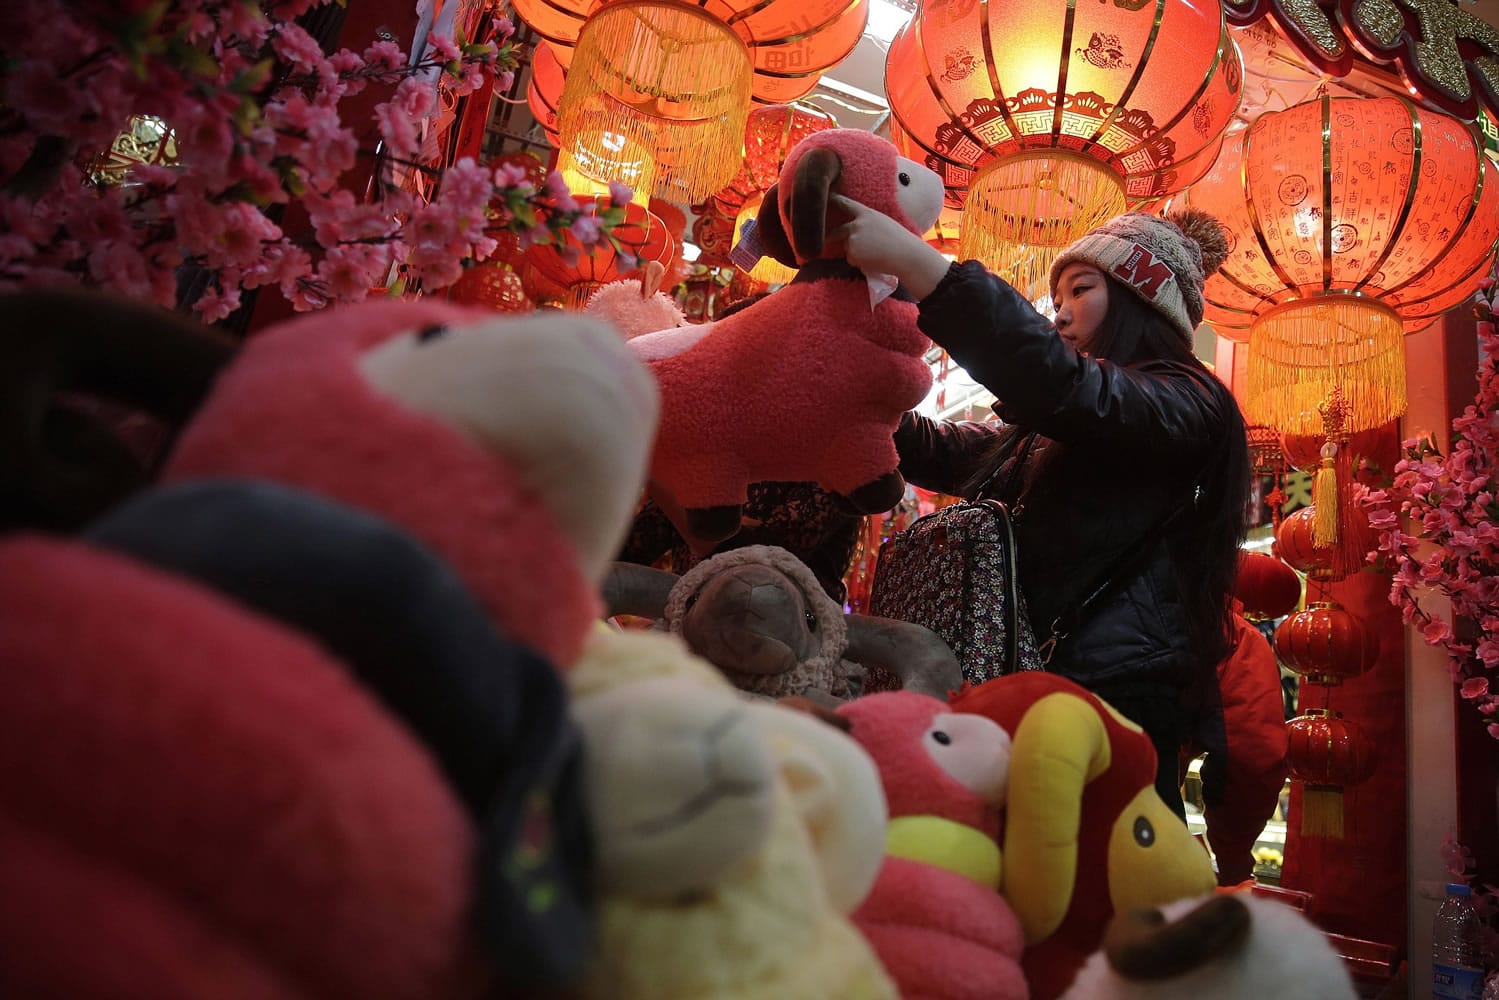 A woman shops toy sheep for Lunar New Year decorations in Beijing, China.